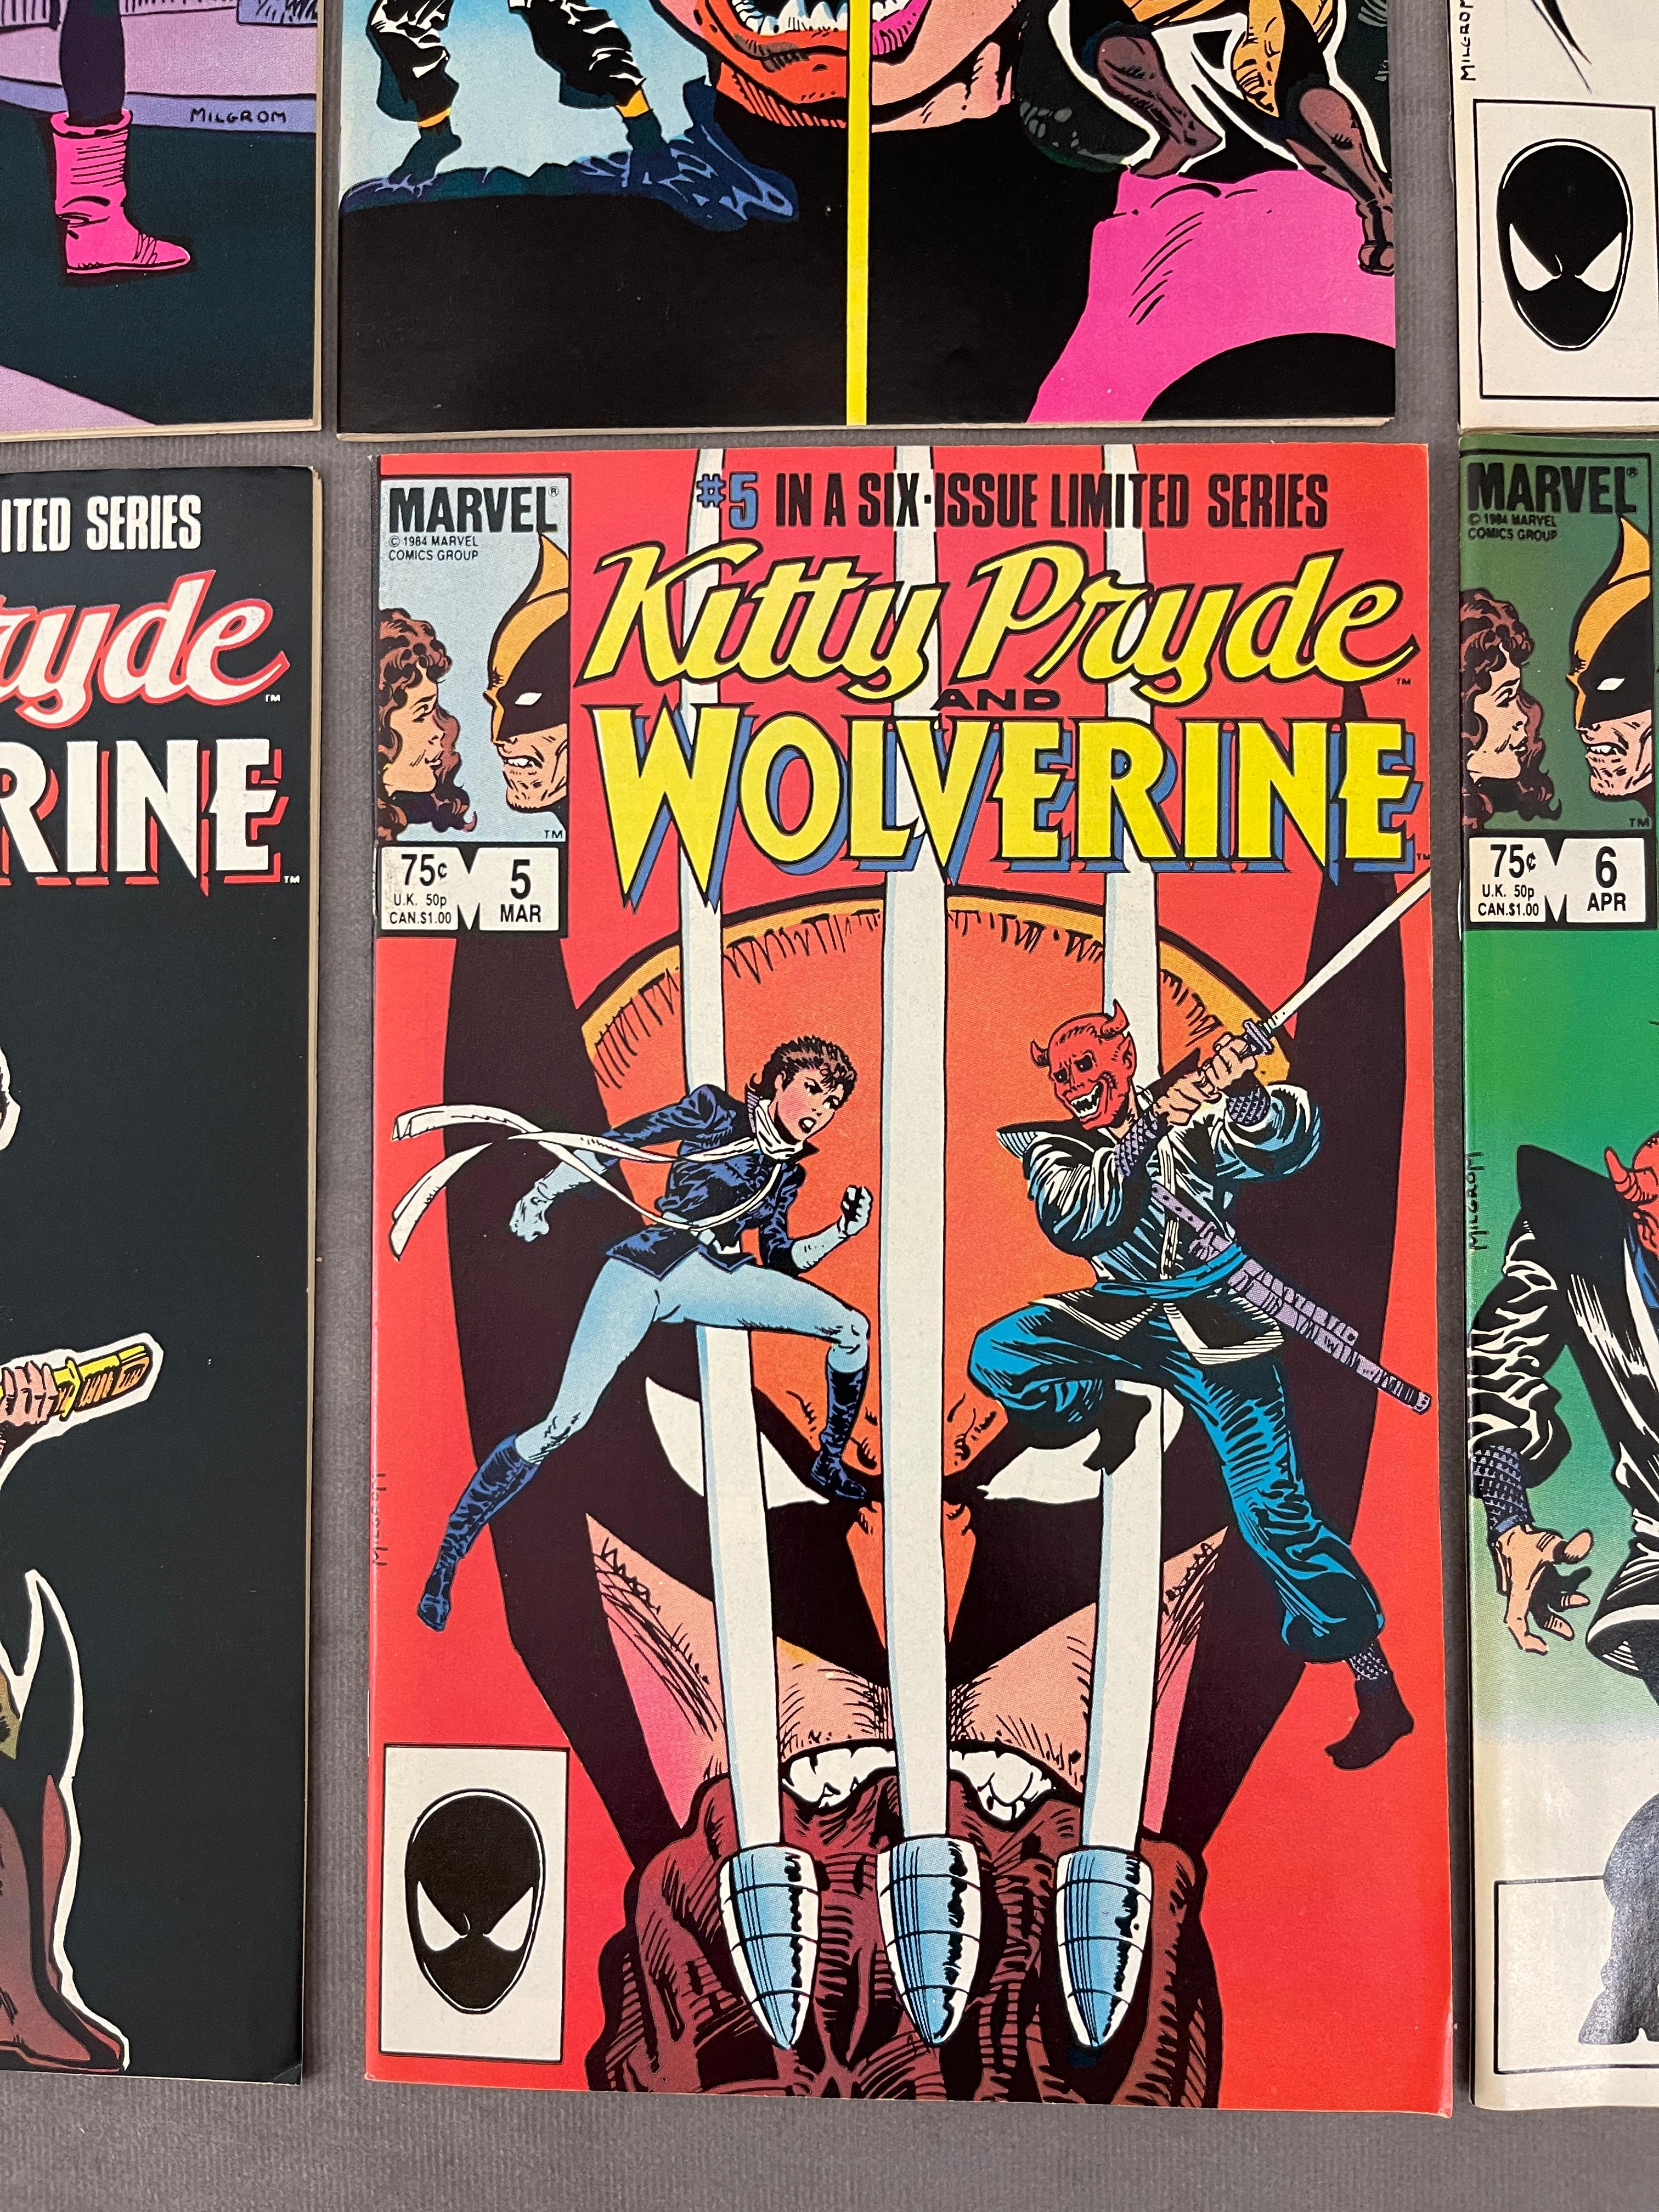 Kitty Pryde and Wolverine #1-6 Marvel Comic Books